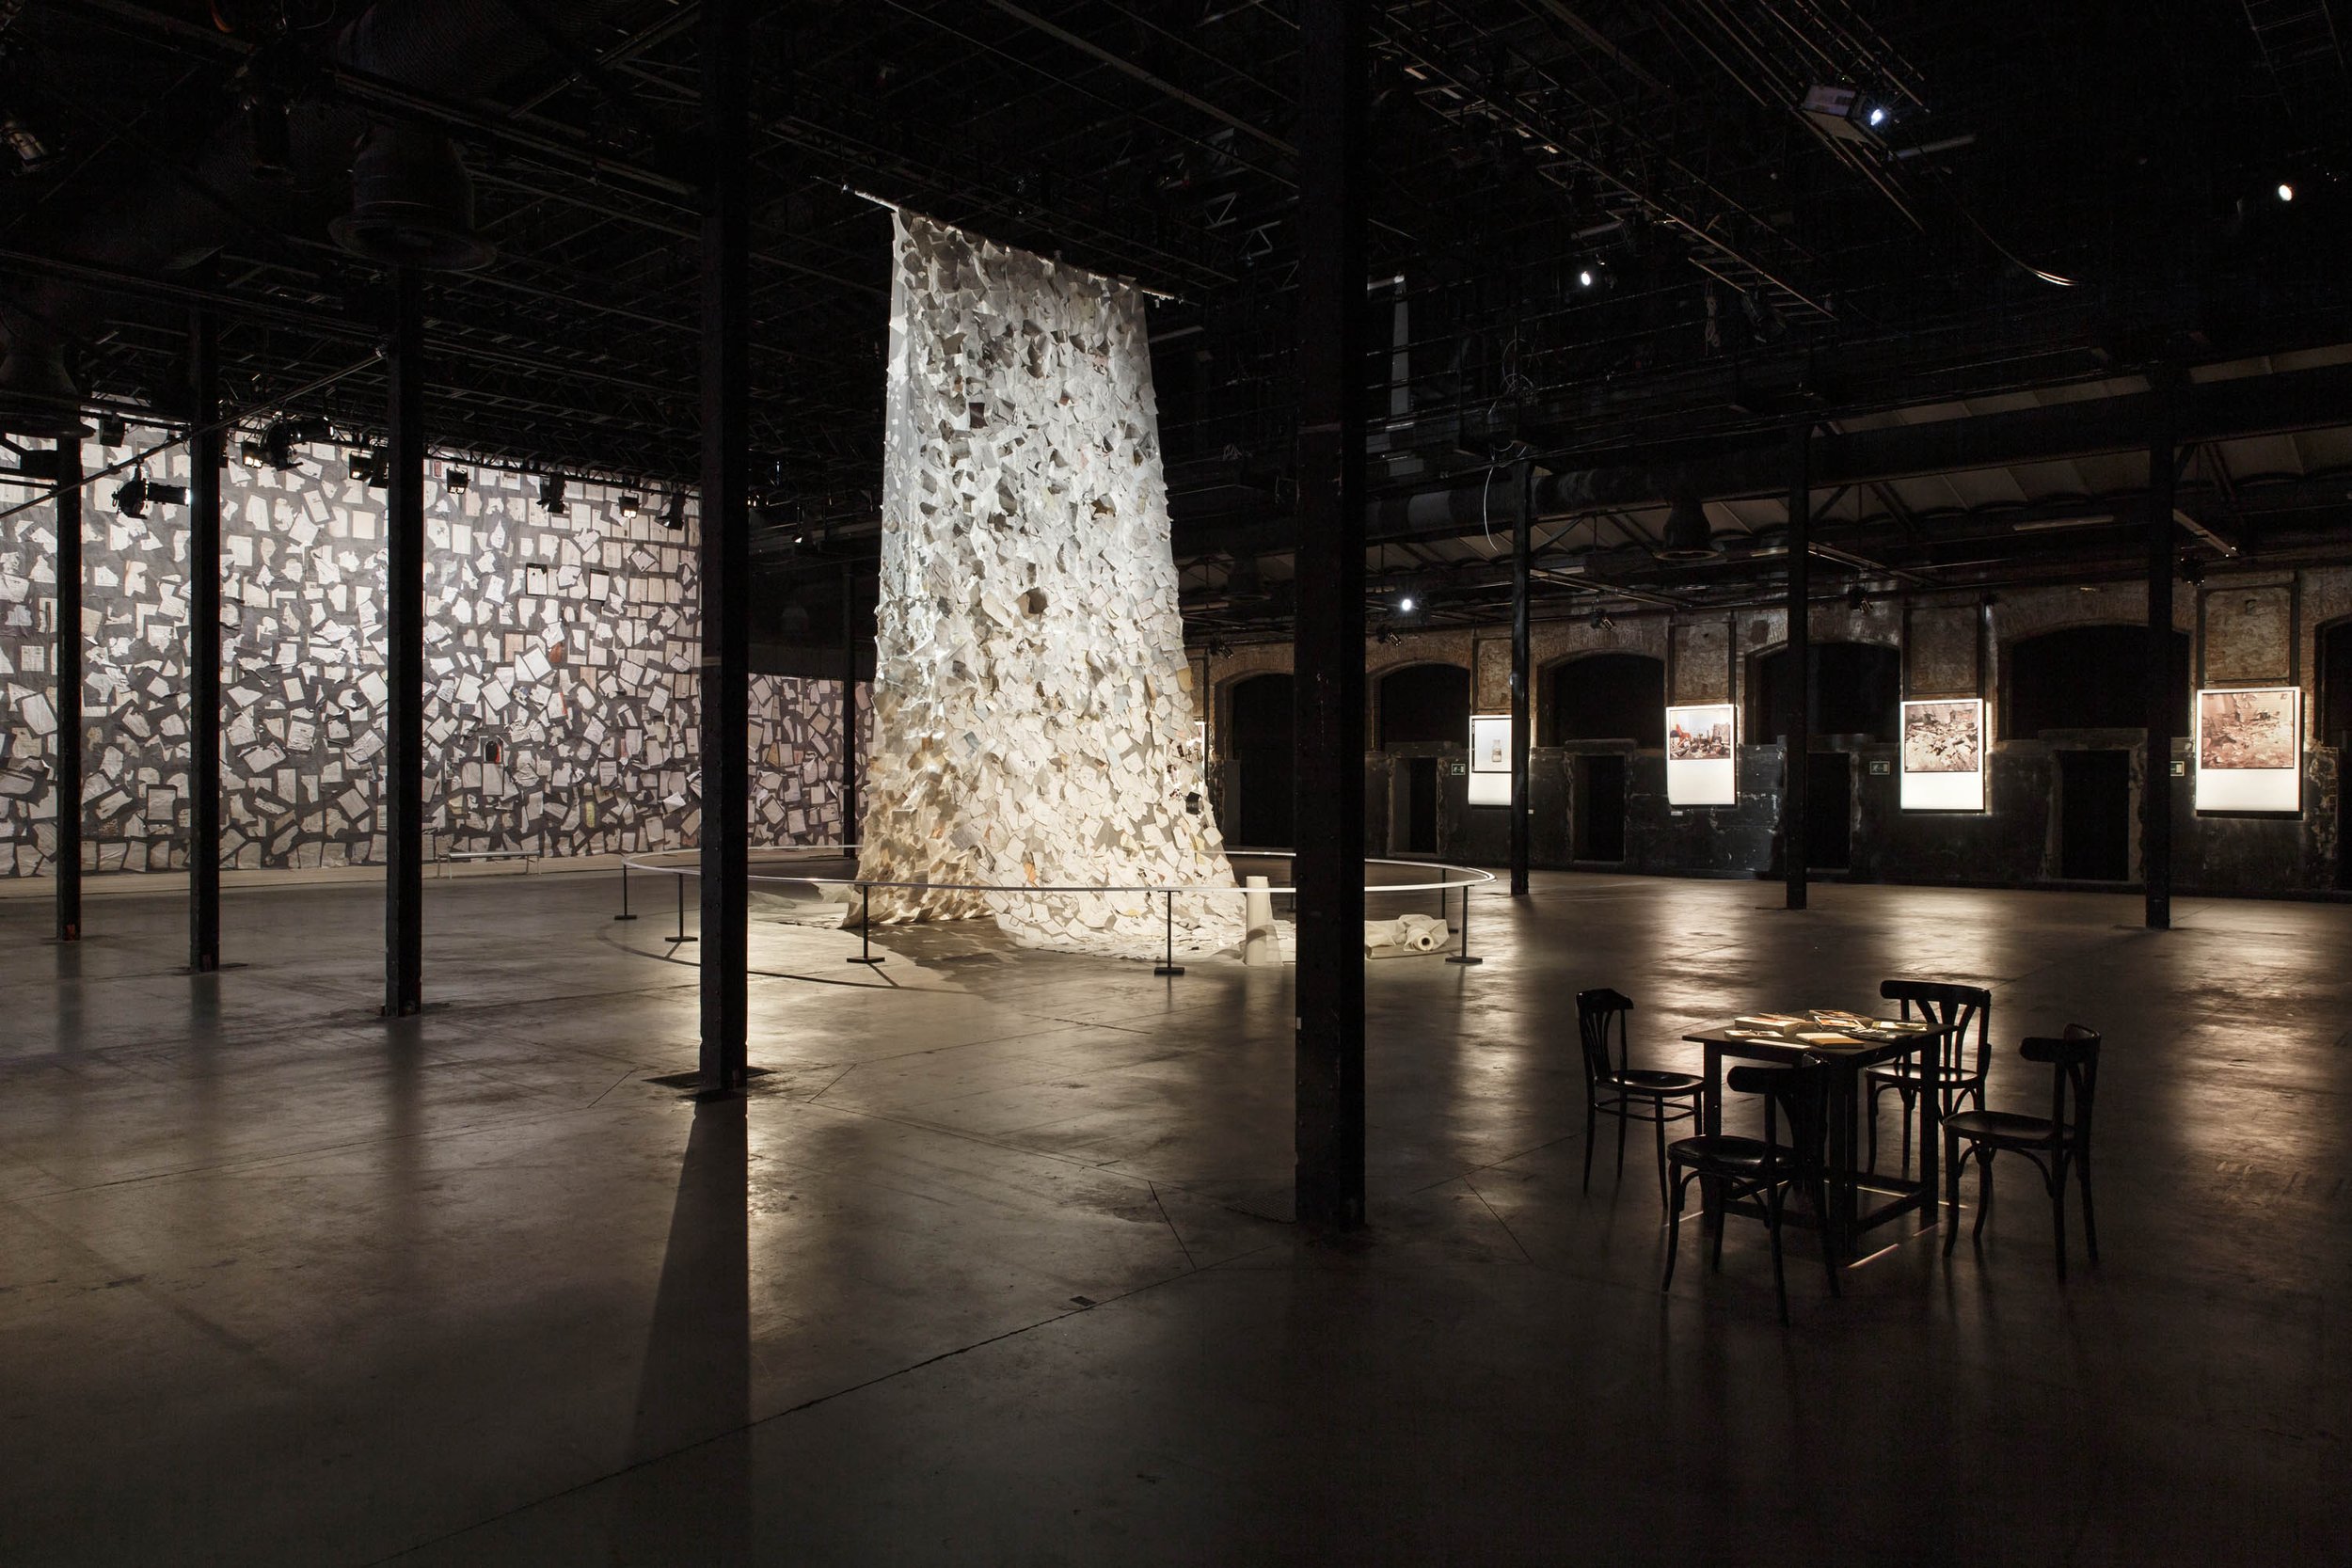  The Archive of Dust, Installation views at Naves Matadero, Madrid, 2019, curated by Mateo Feijoo 